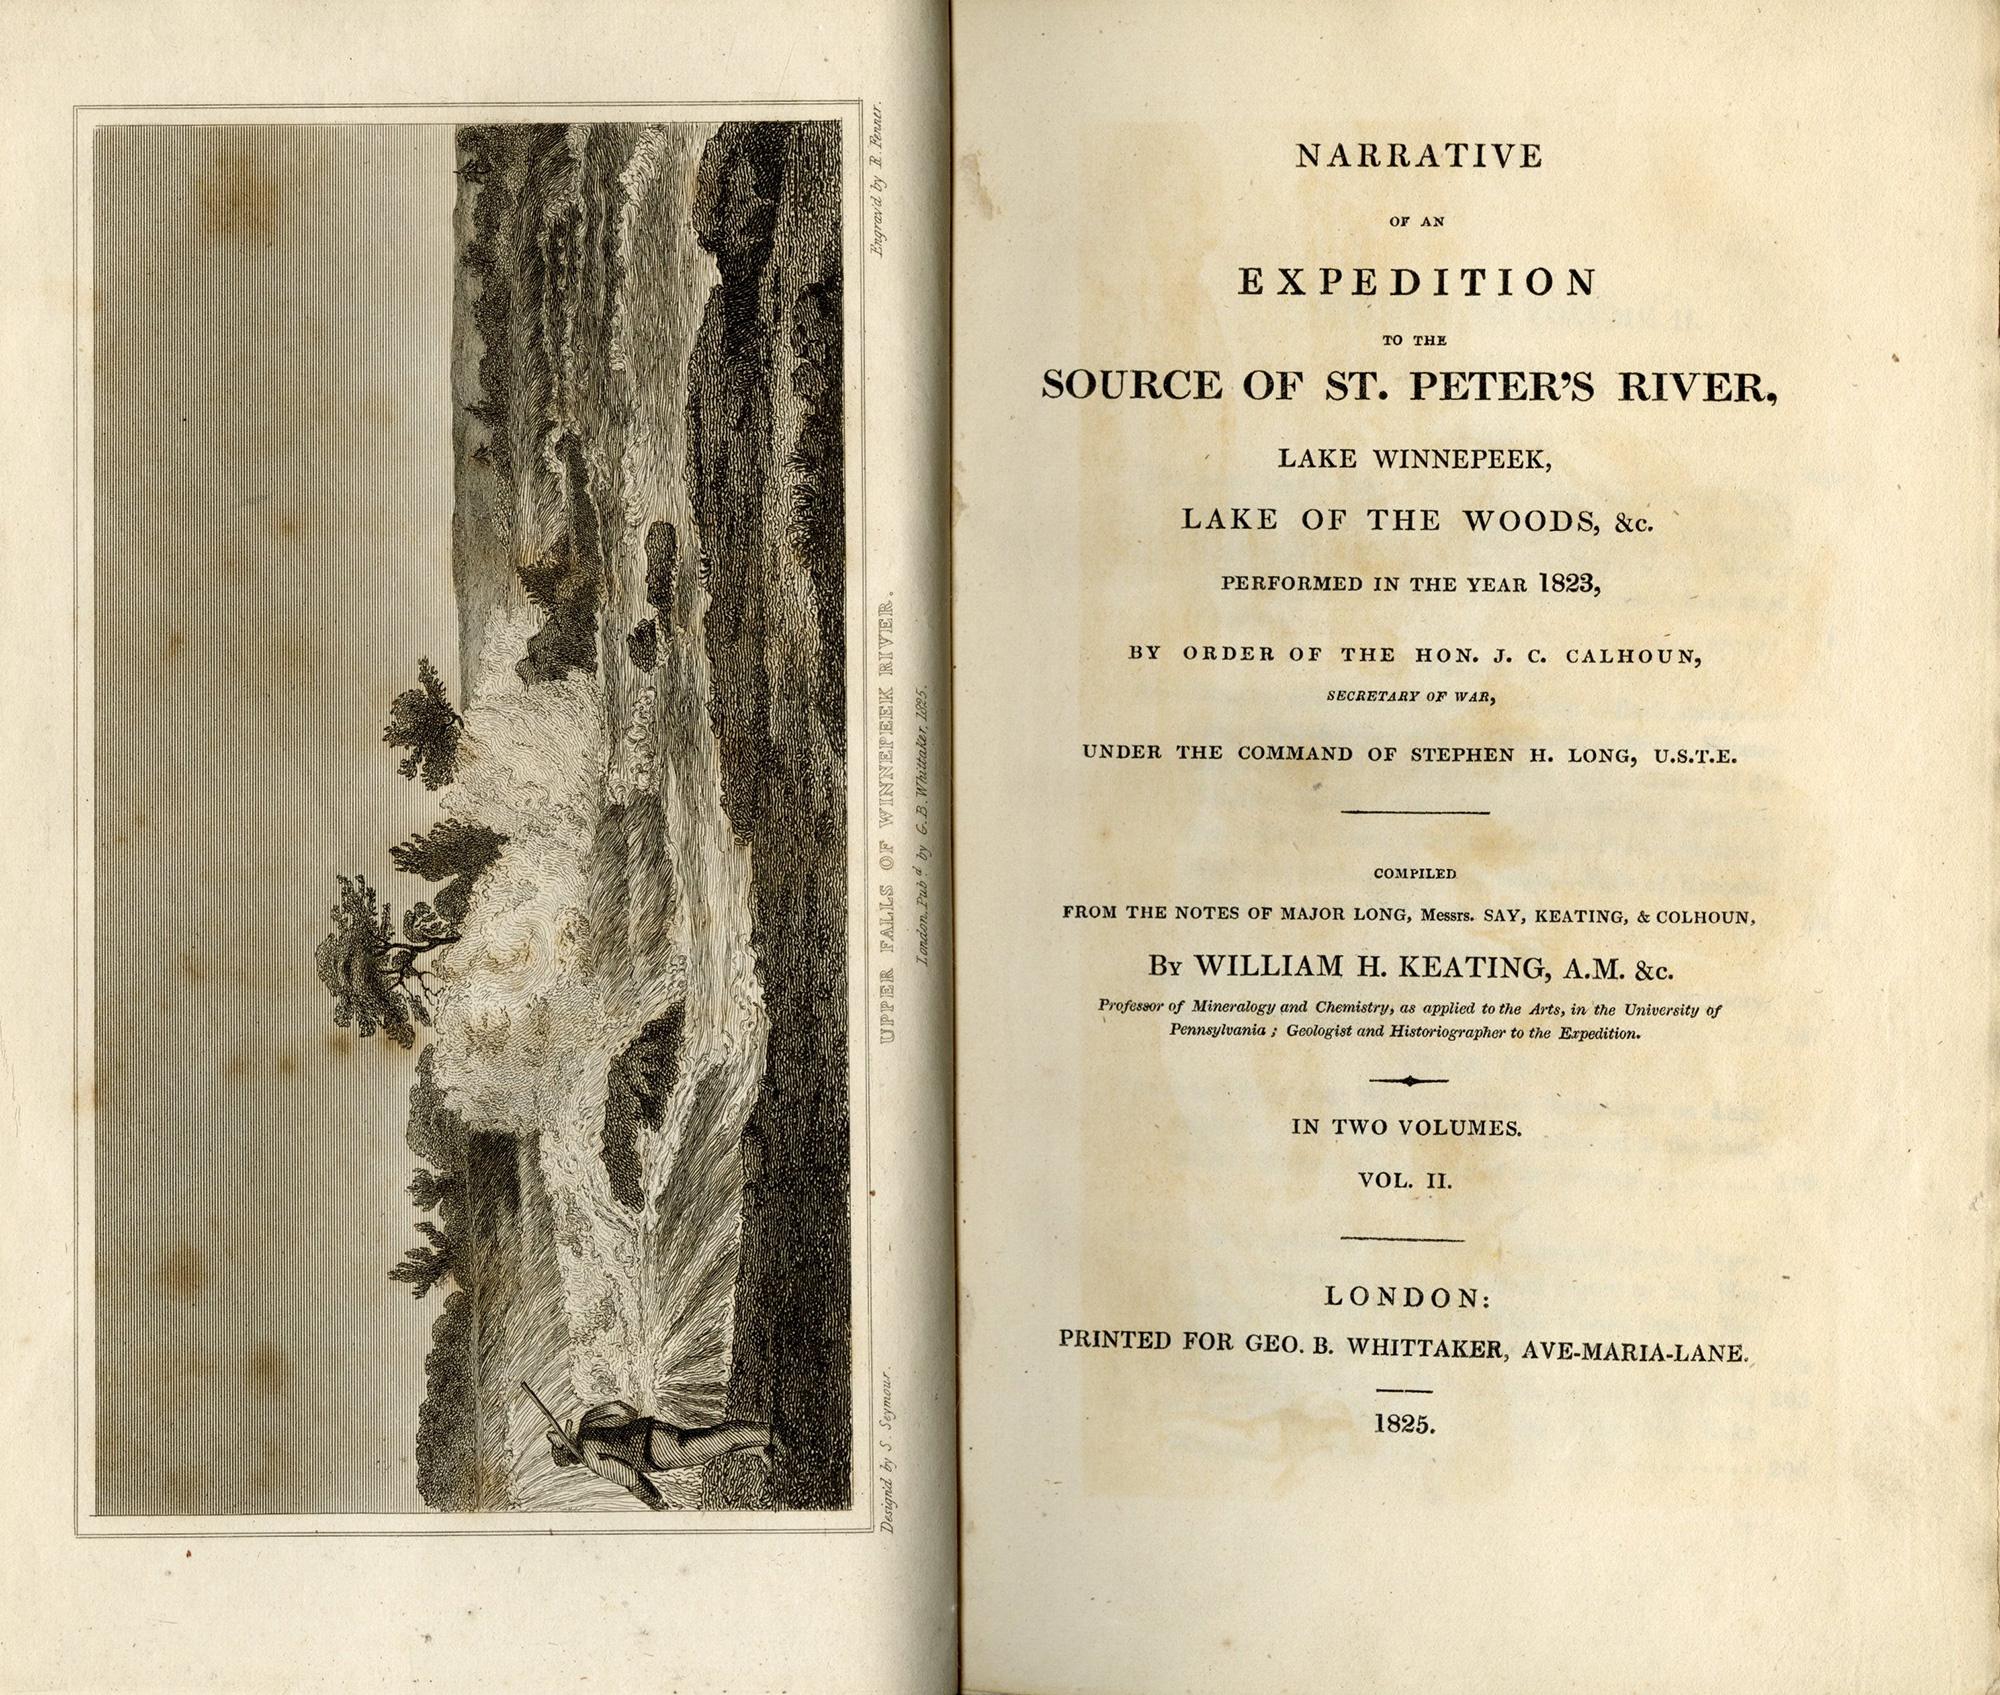 Keating William H
Narrative of an Expedition to the Source of St Peter's River Lake Winnipeek Lake of the Woods &C Performed in the Year 1823 by Order of the Hon J C Calhoun Secretary of War Under the Command of Stephen H Long U S T E

London, Geo B